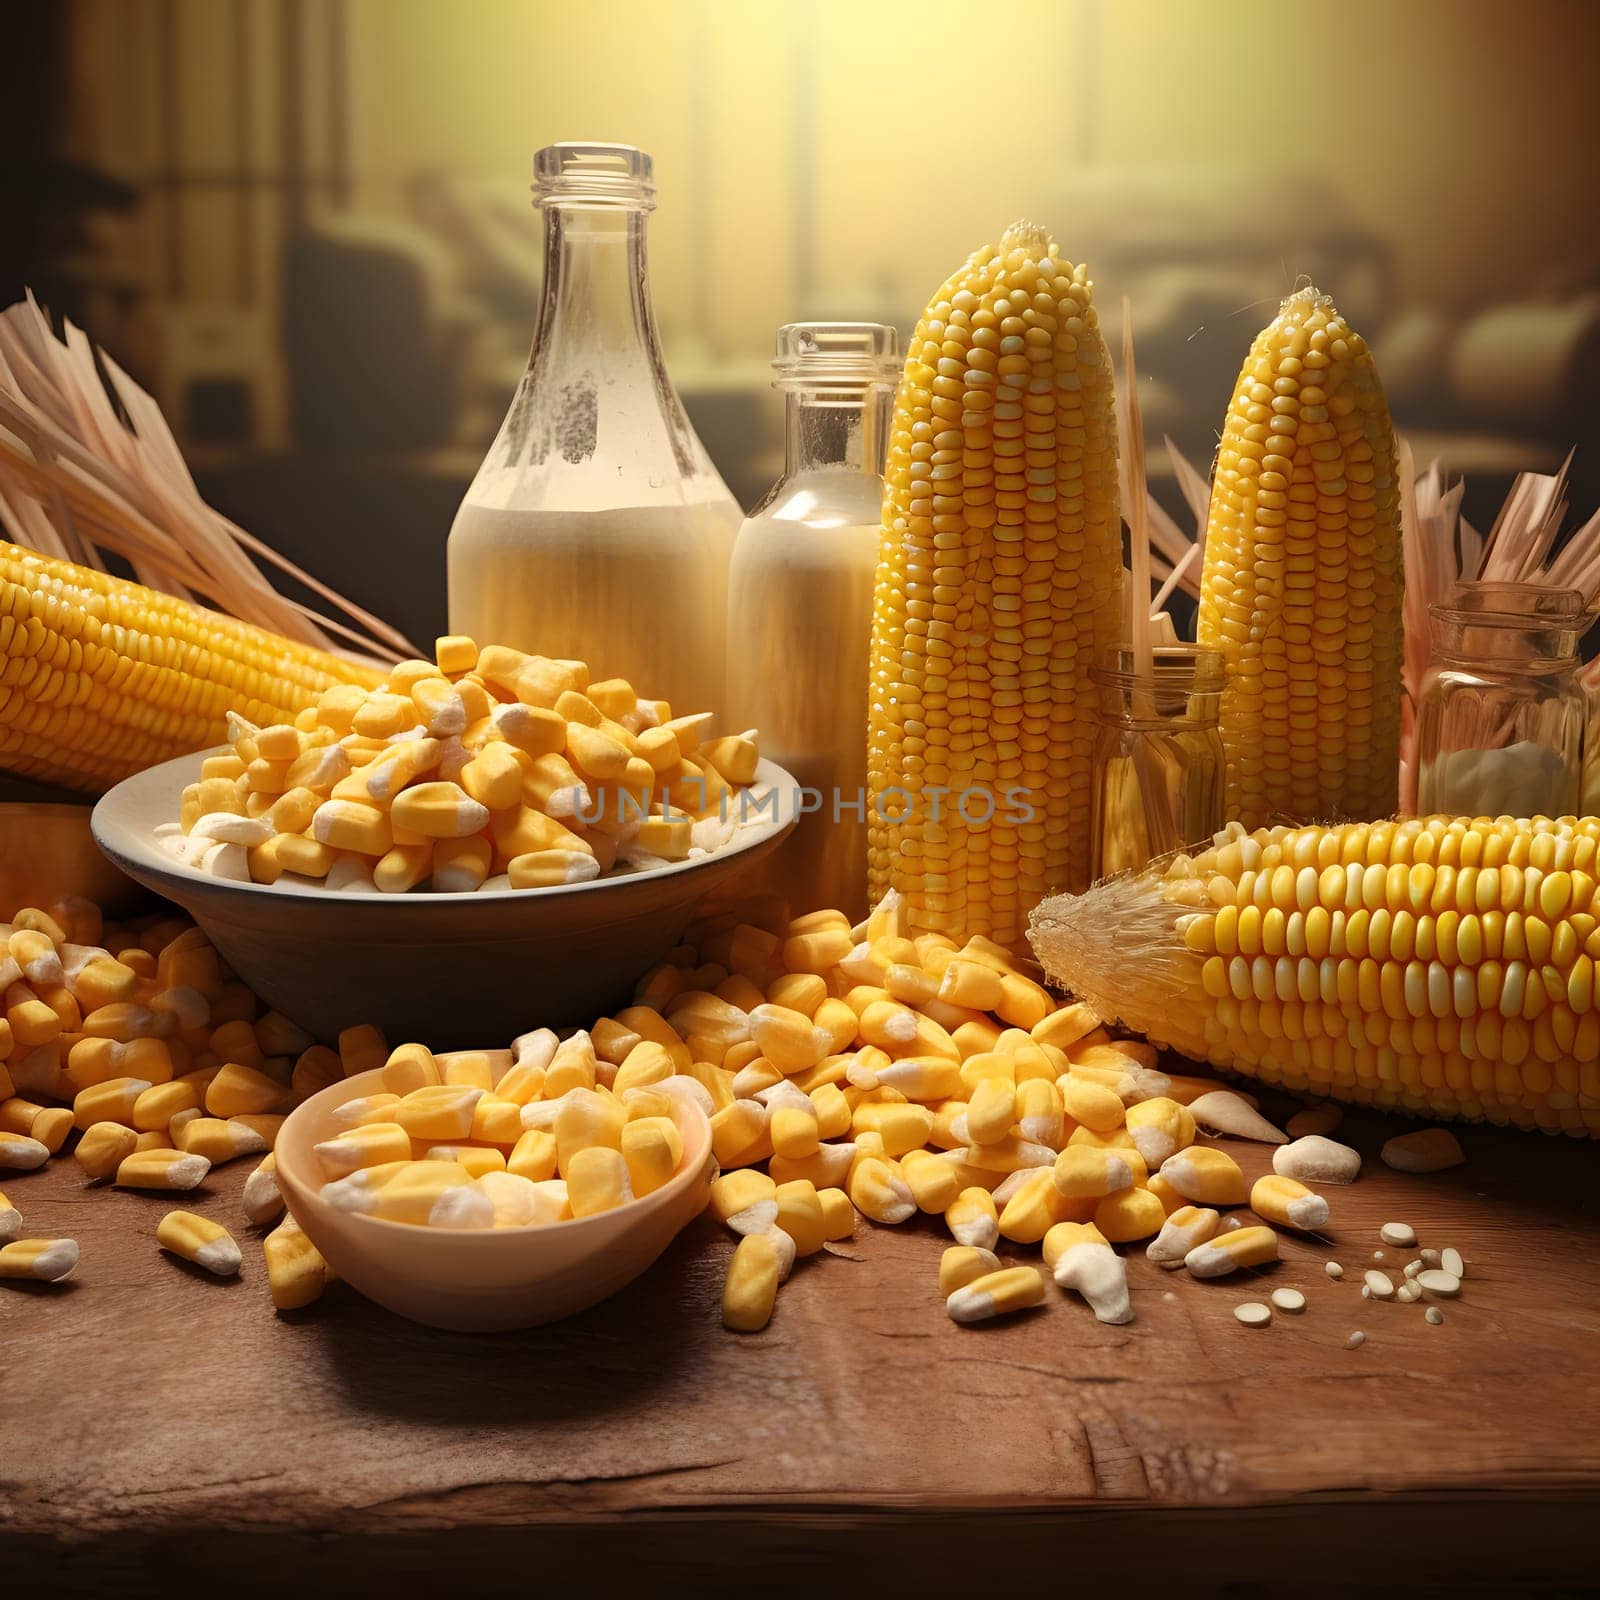 Yellow corn cobs on a wooden table two bottles of milk, corn kernels. Corn as a dish of thanksgiving for the harvest. by ThemesS